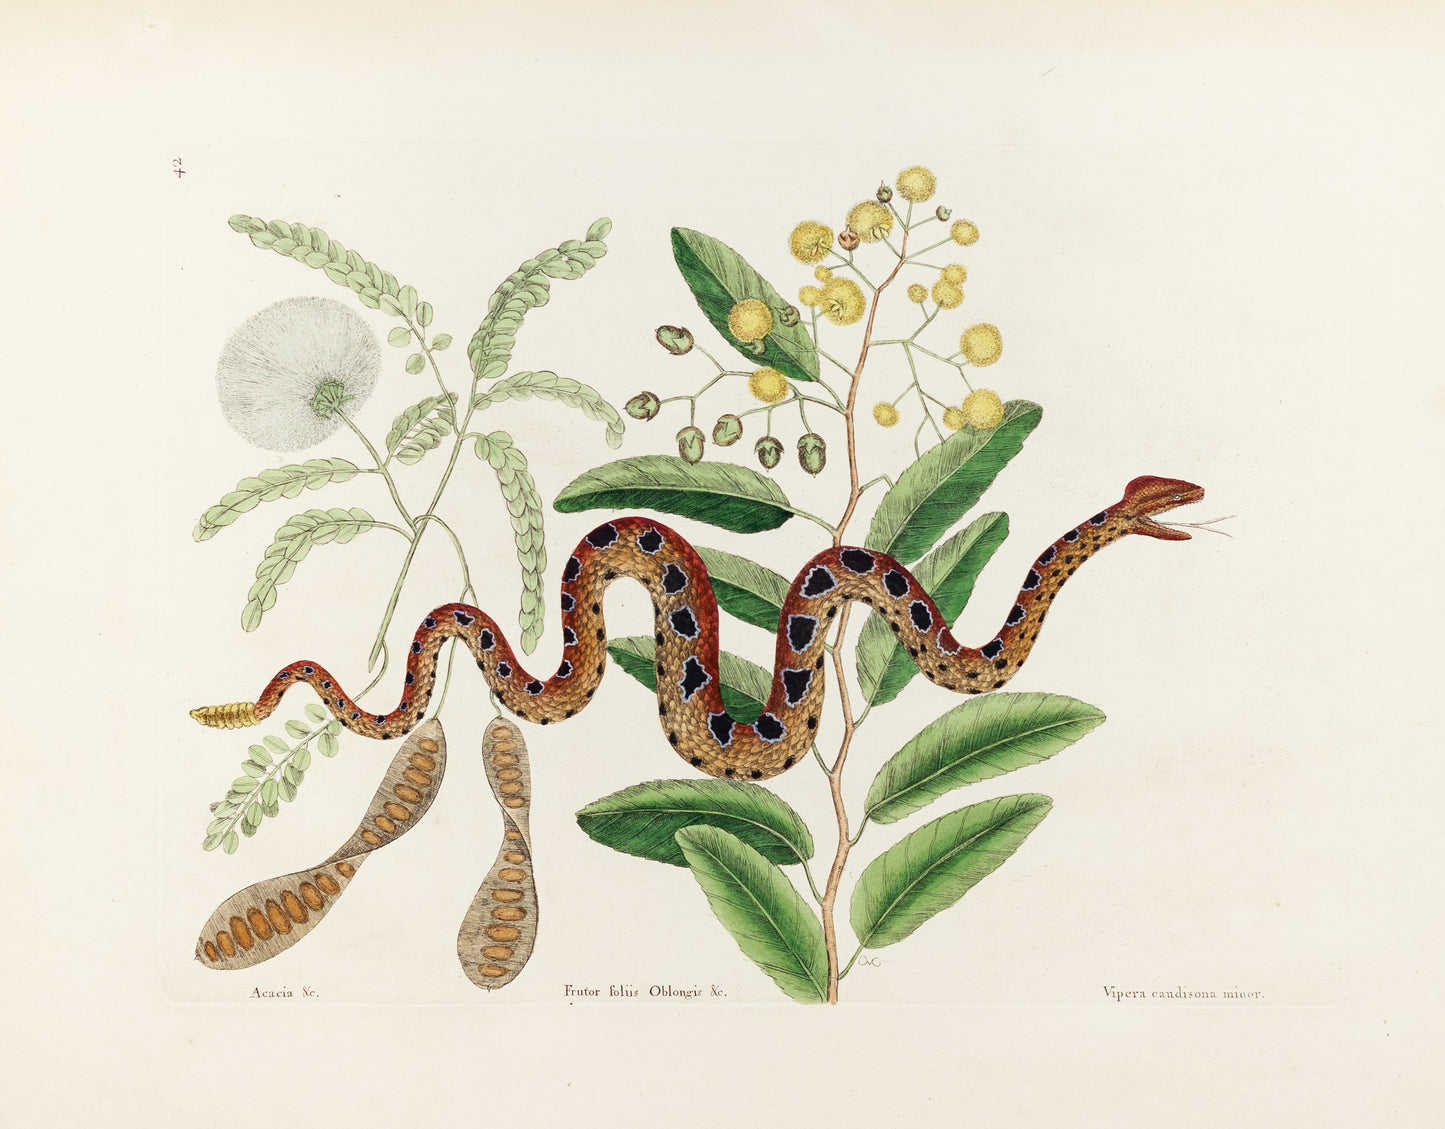 Catesby, Mark. Vol.II, Tab. 42, The Small Rattle-Snake